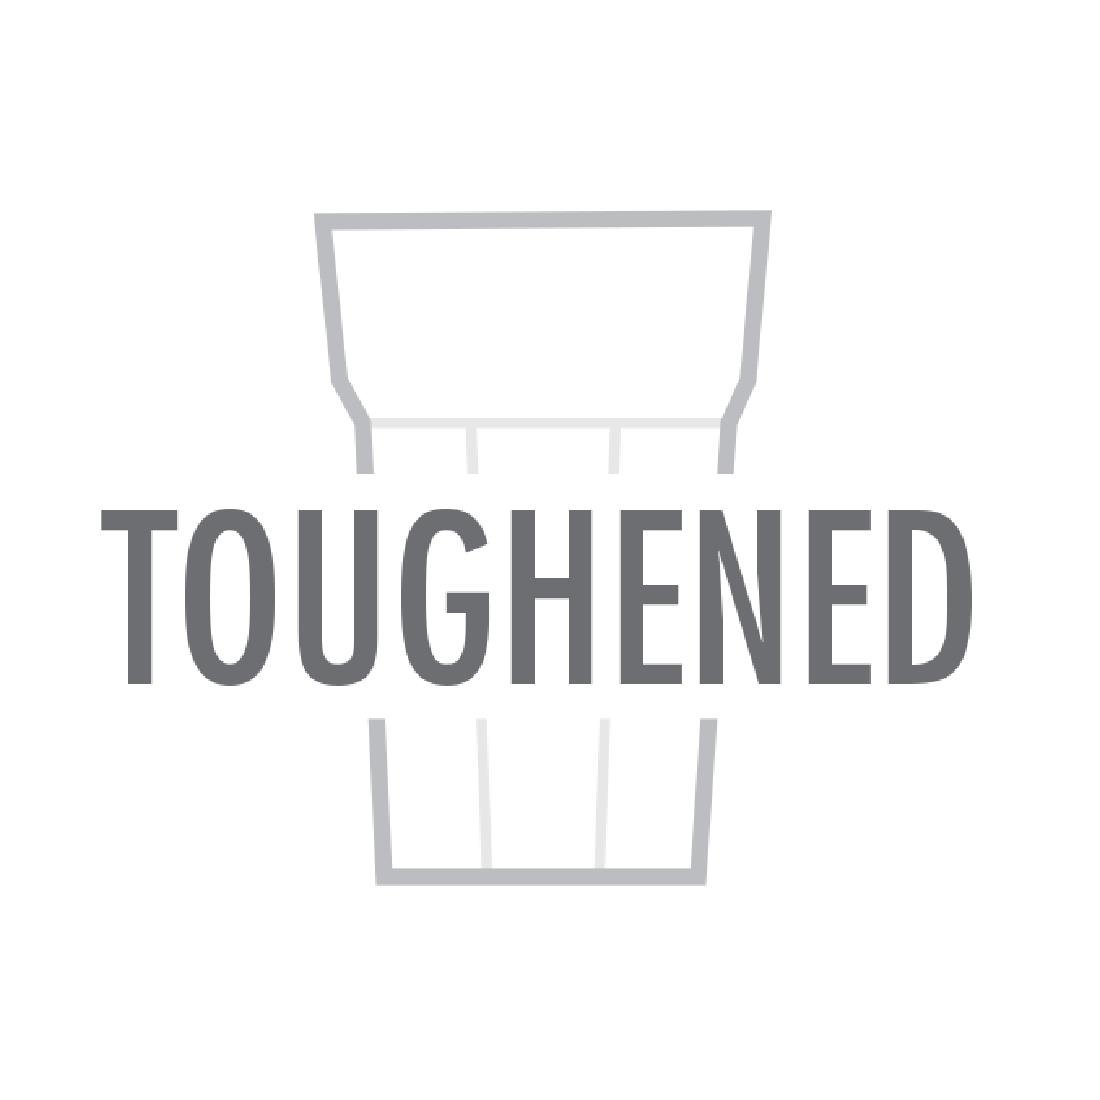 GF938 Olympia Toughened Orleans Tumblers 200ml (Pack of 12) JD Catering Equipment Solutions Ltd